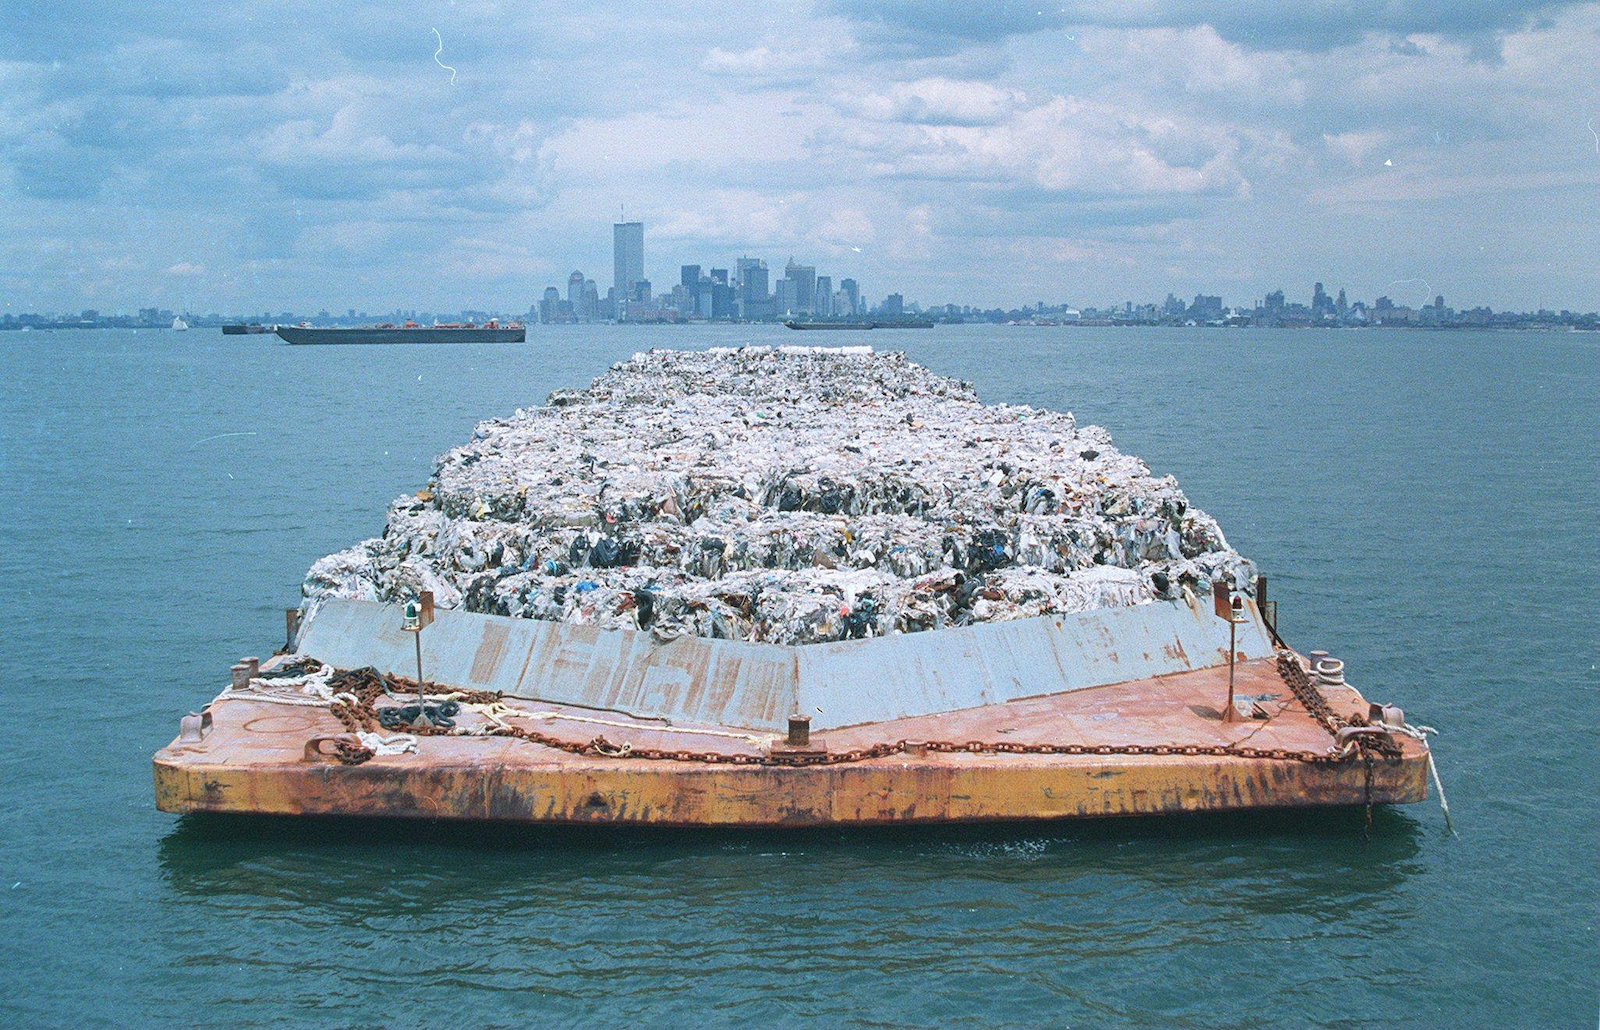 A barge loaded with garbage